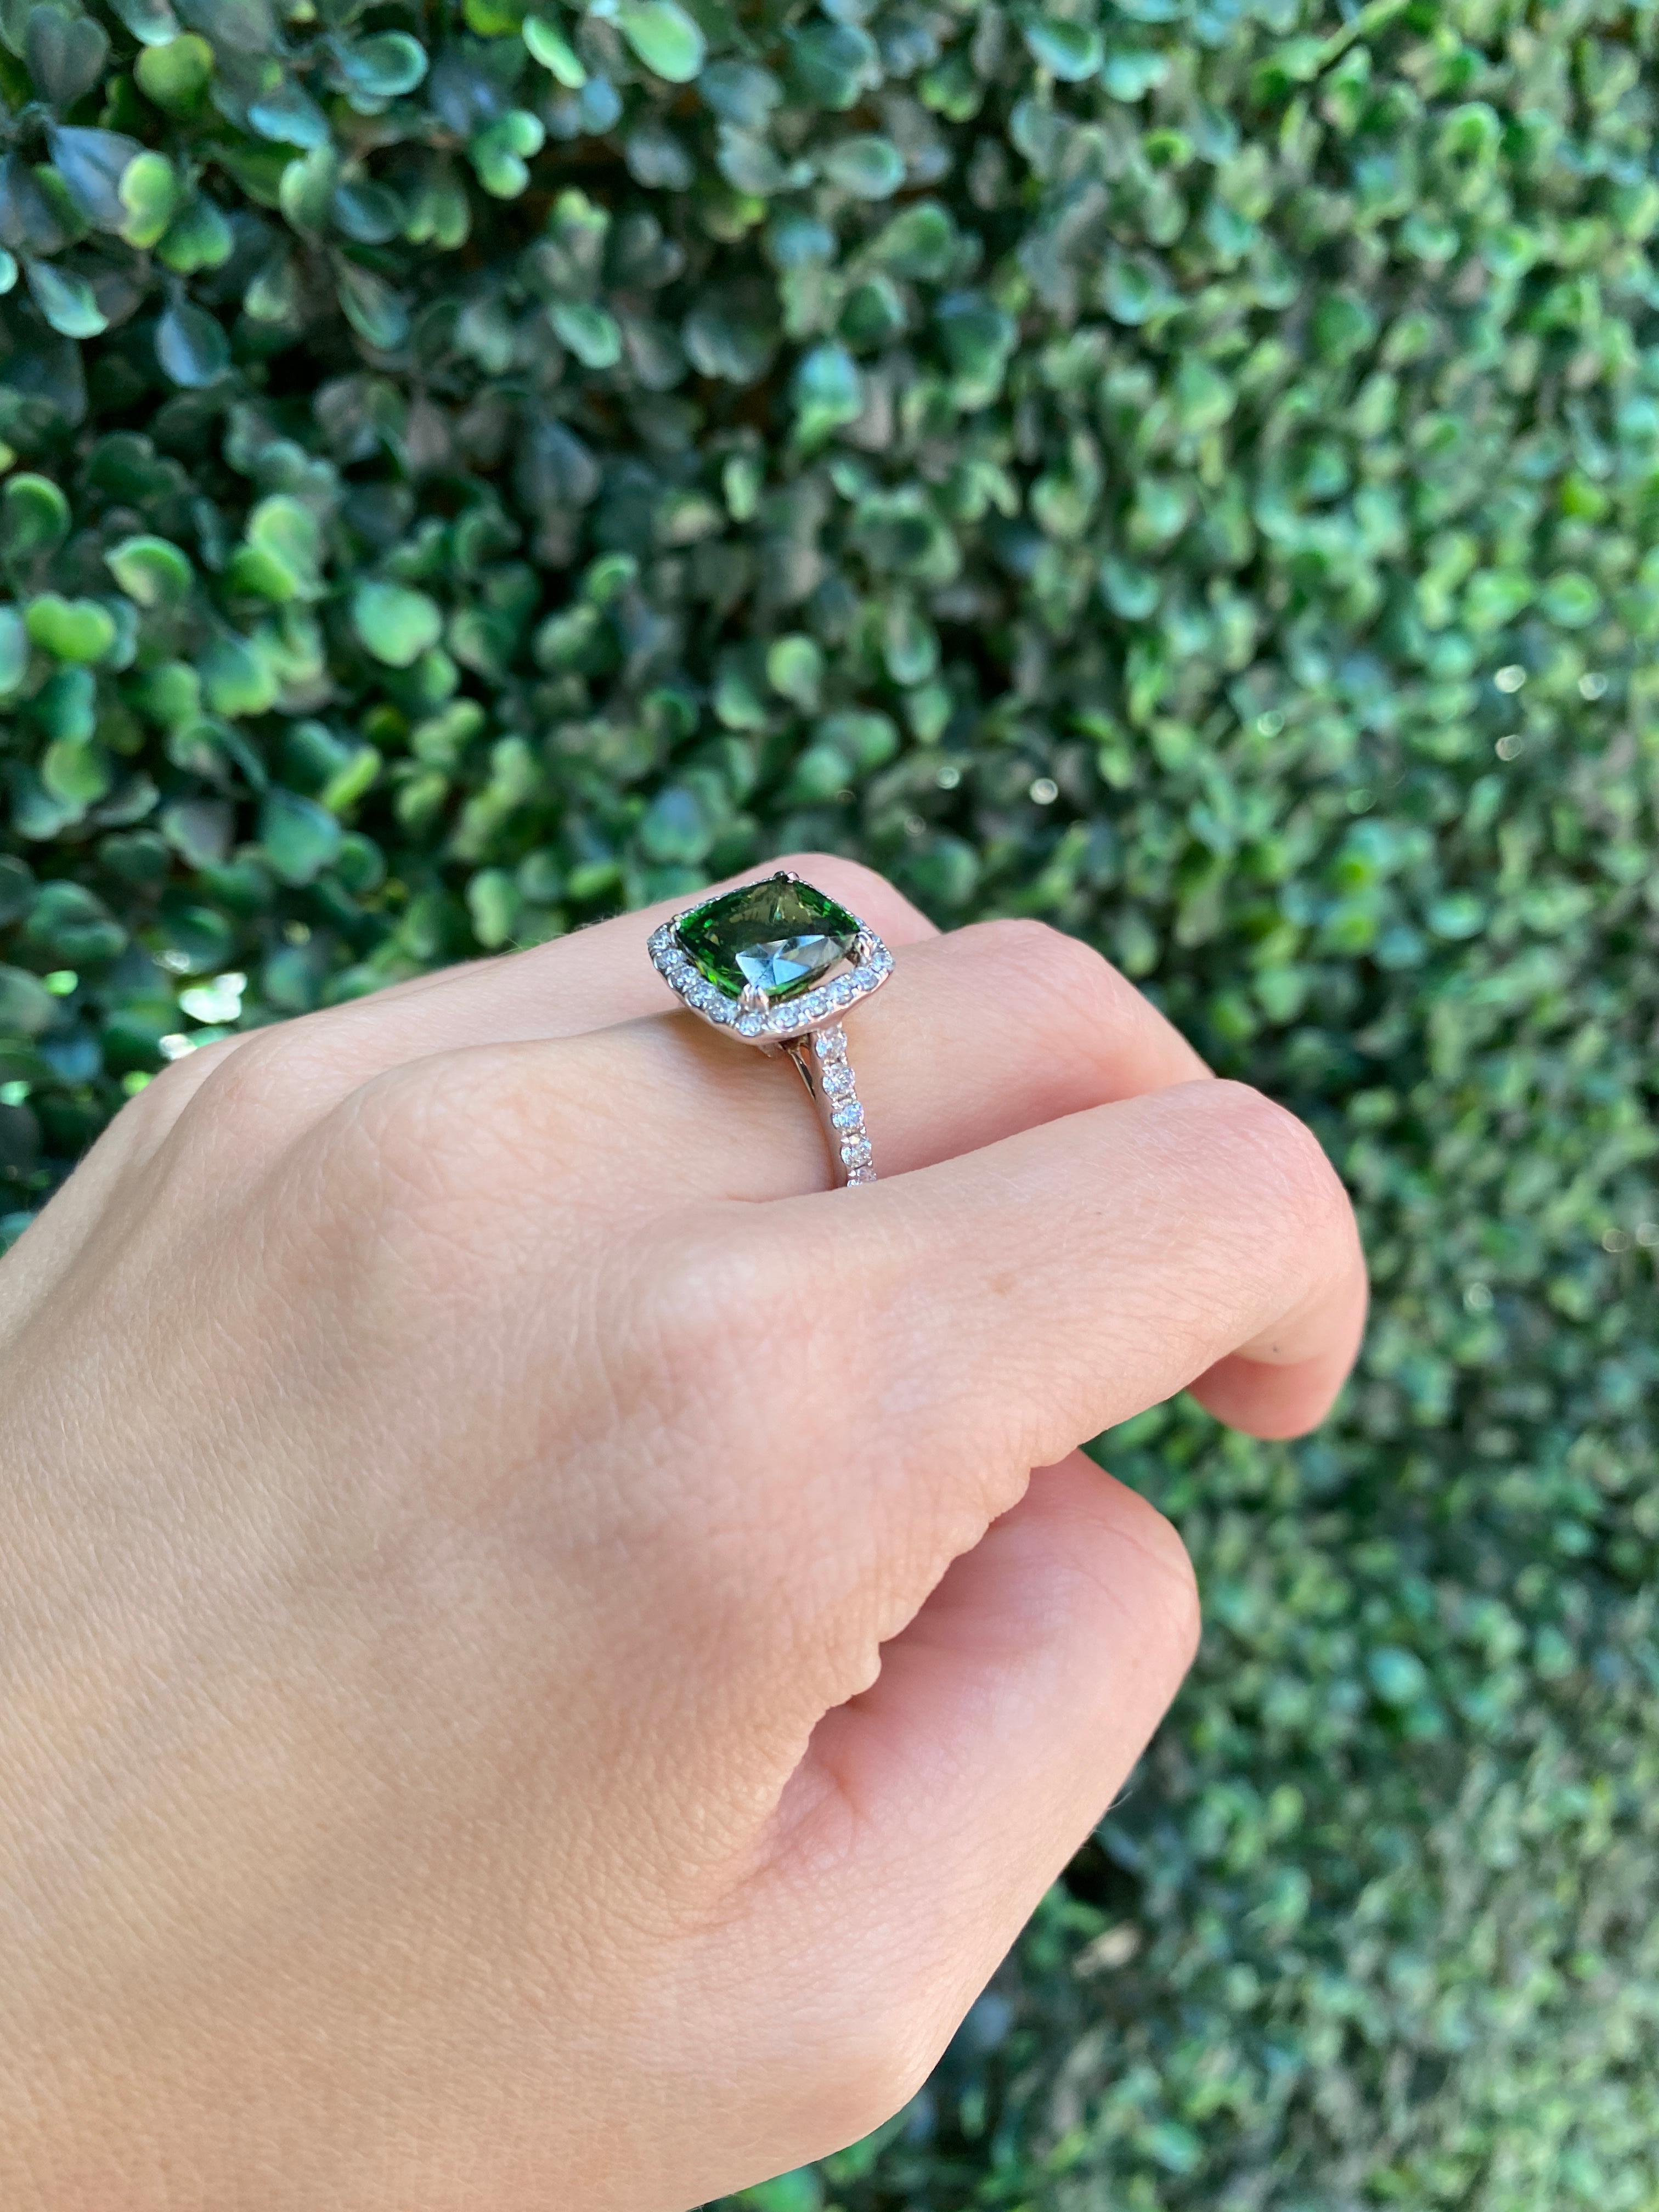 5.42 Carat Cushion Cut Green Zircon Ring with 0.52 Carat Total Diamond Halo For Sale 3